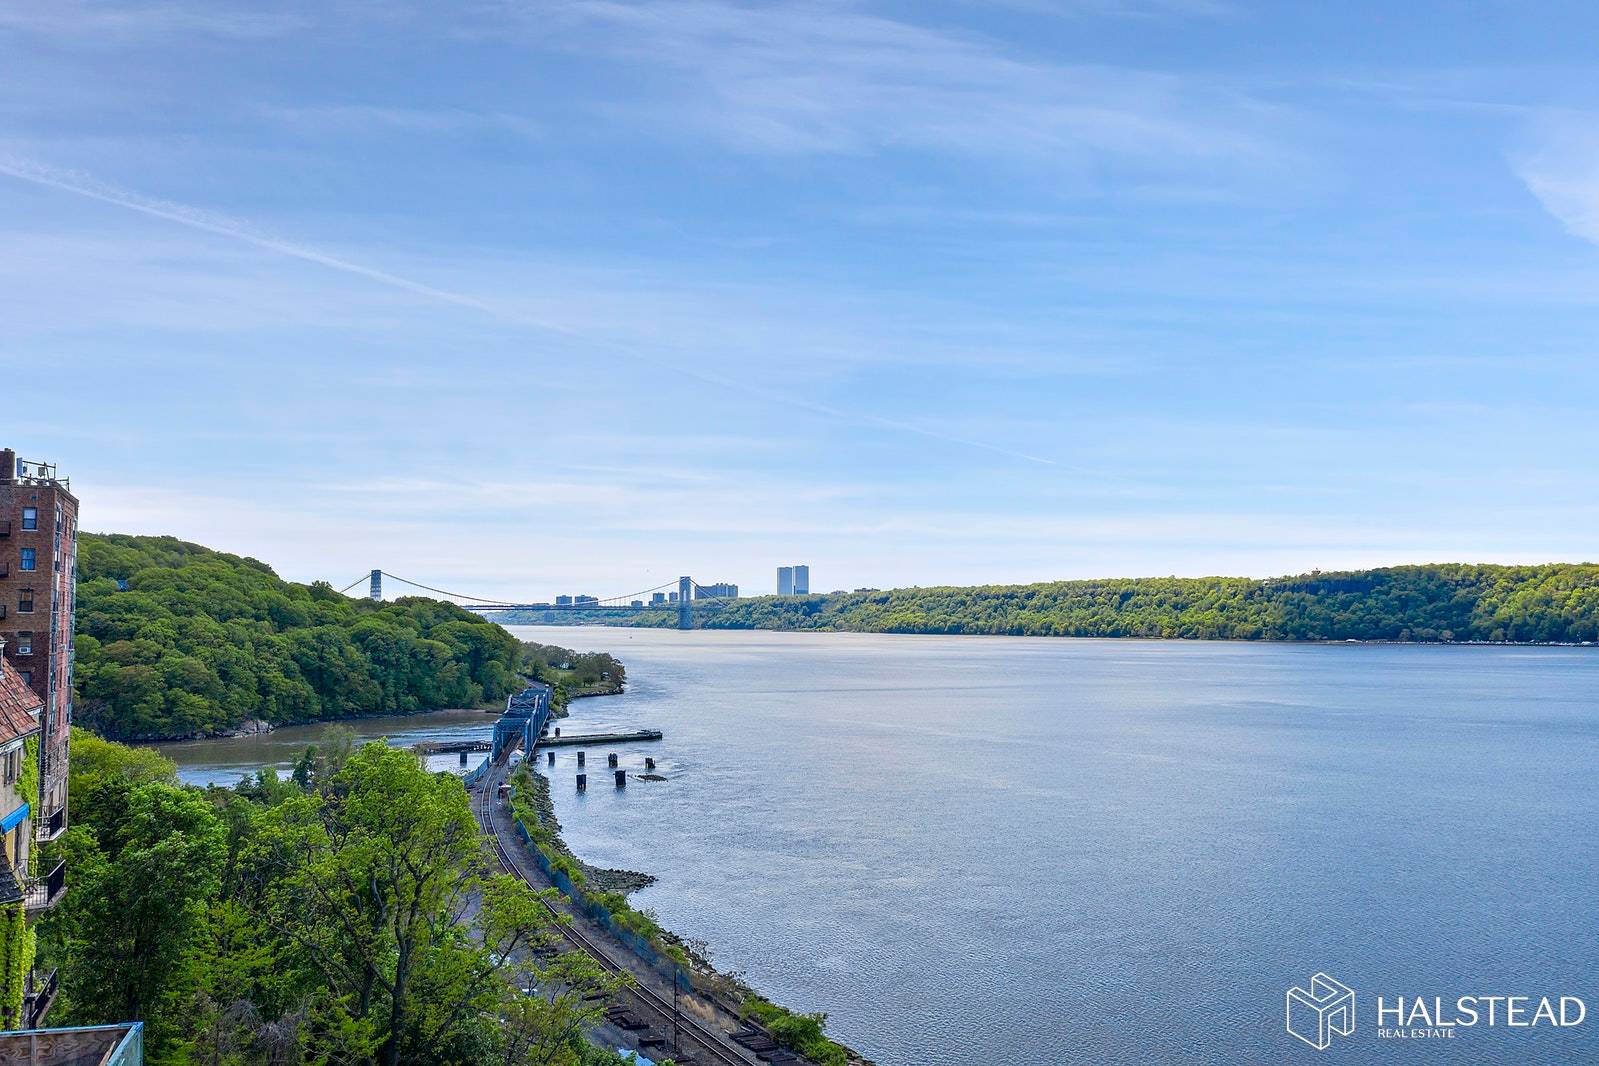 Enjoy glorious sunsets, changing of the seasons on the Hudson River facing the Palisades.